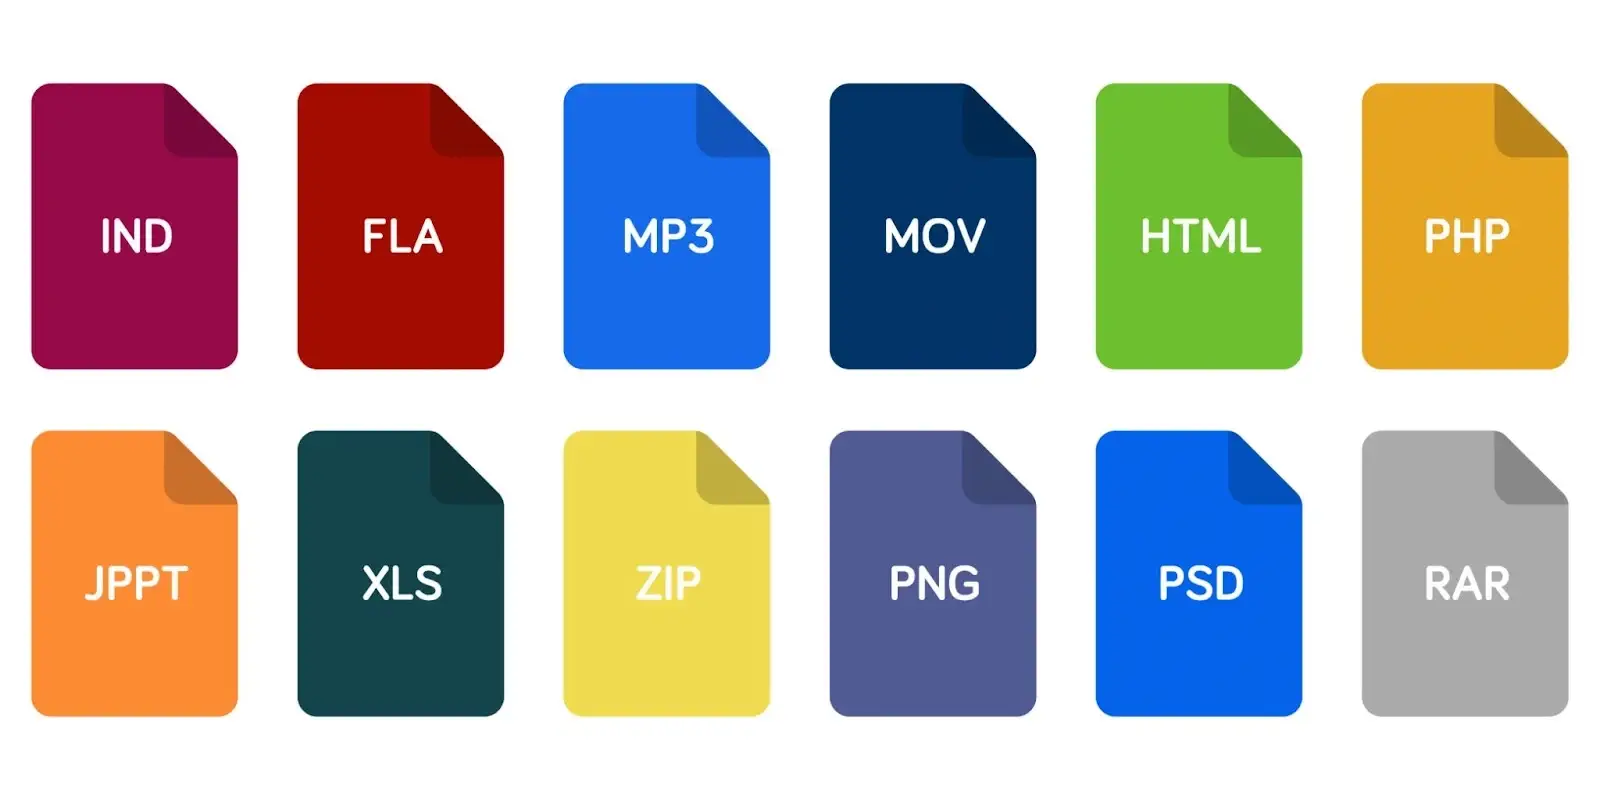 Google Drive supports multiple file formats